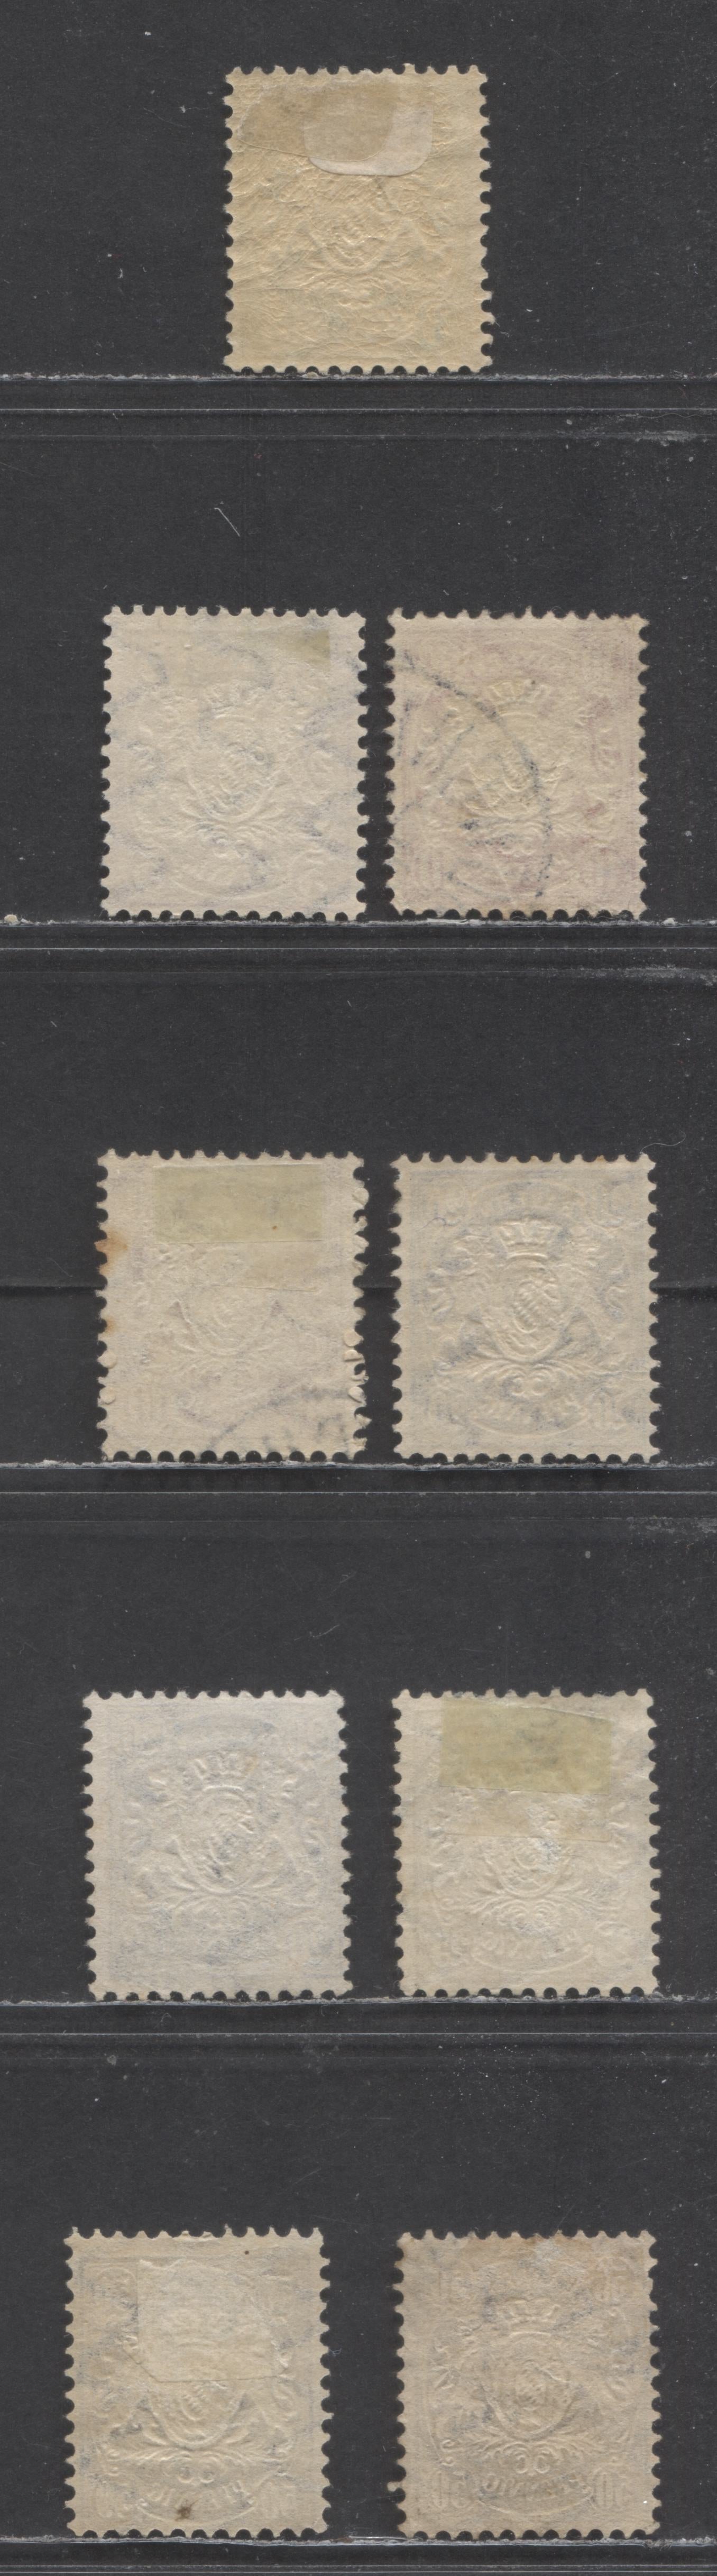 Lot 89 Germany - Bavaria Mi#47 (48)-52 (53) 1881 Arms Issue, Perf 11.5, Vertical Wavy Line Wmks, 9 Fine/Very Fine Used Singles, Click on Listing to See ALL Pictures, Estimated Value $15